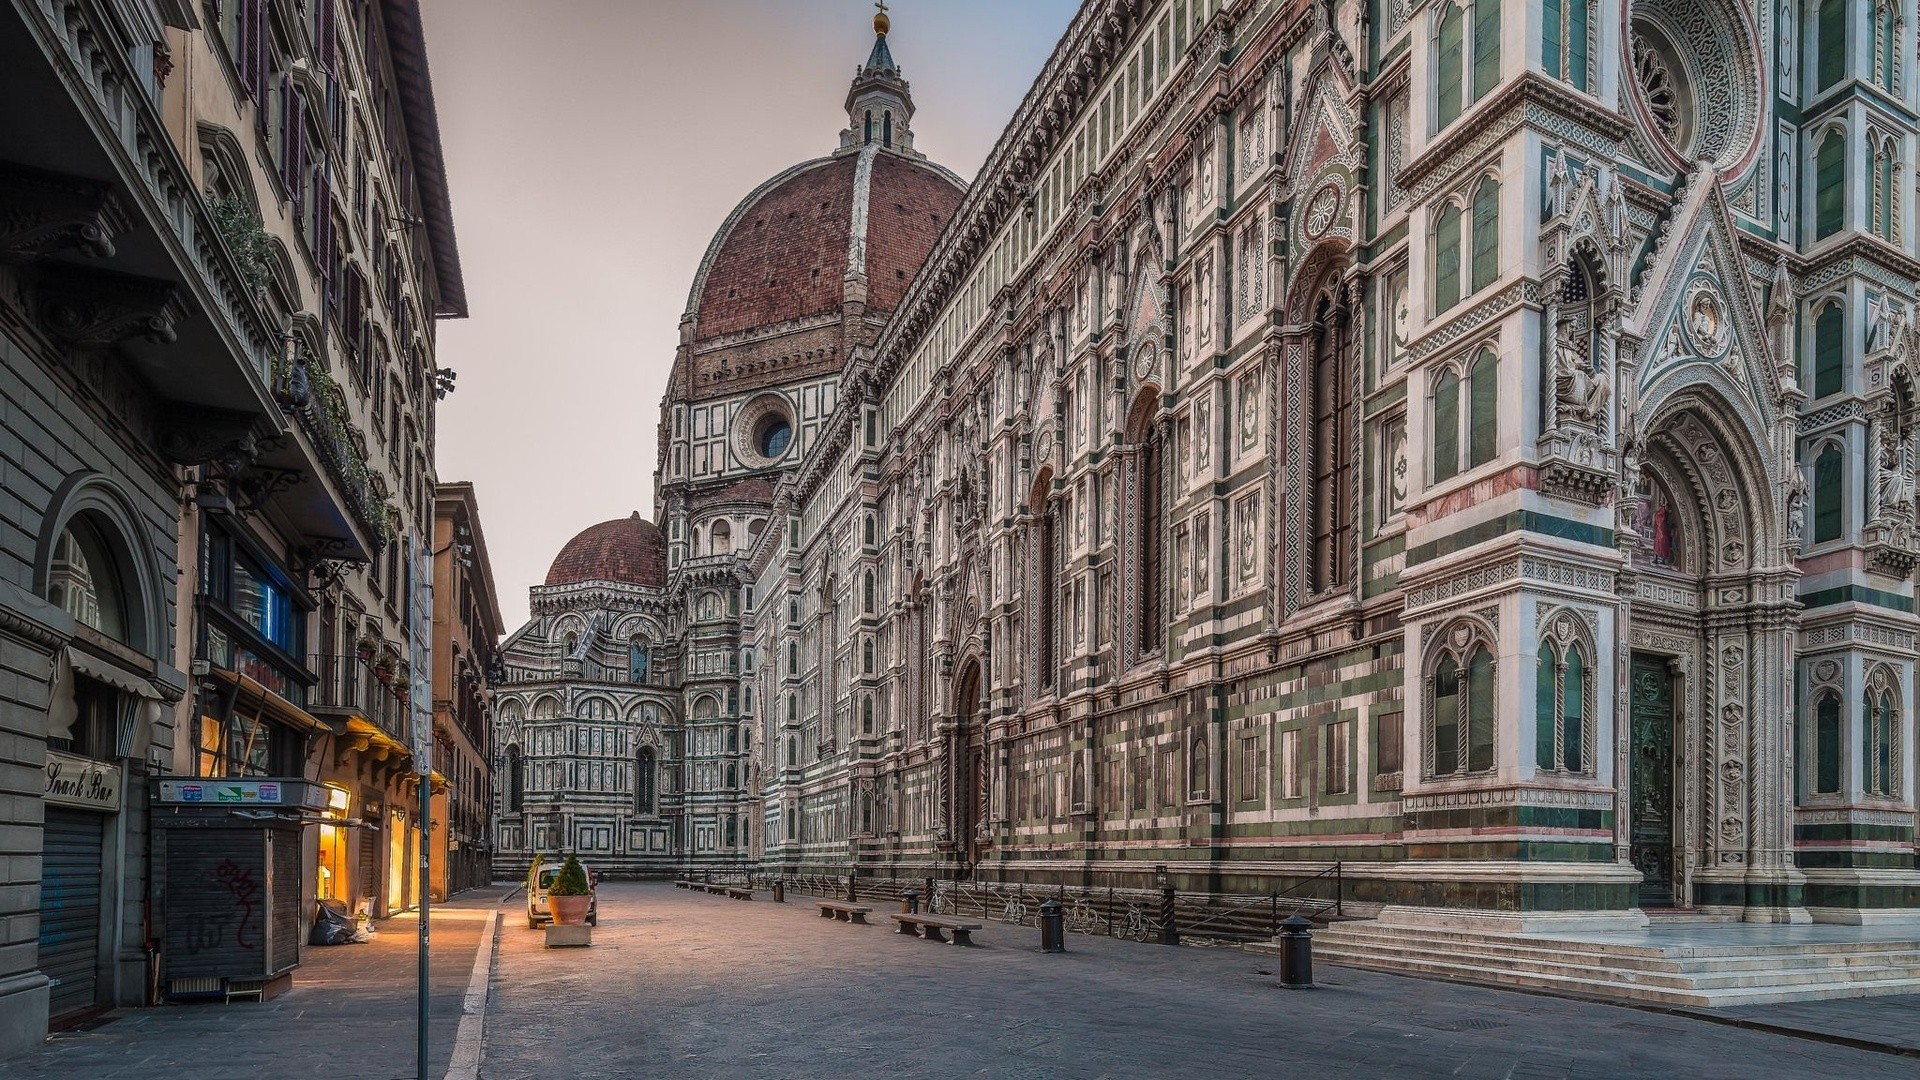 General 1920x1080 architecture old building town street urban Florence Italy lights cathedral arch gothic architecture dome bench car Europe building evening